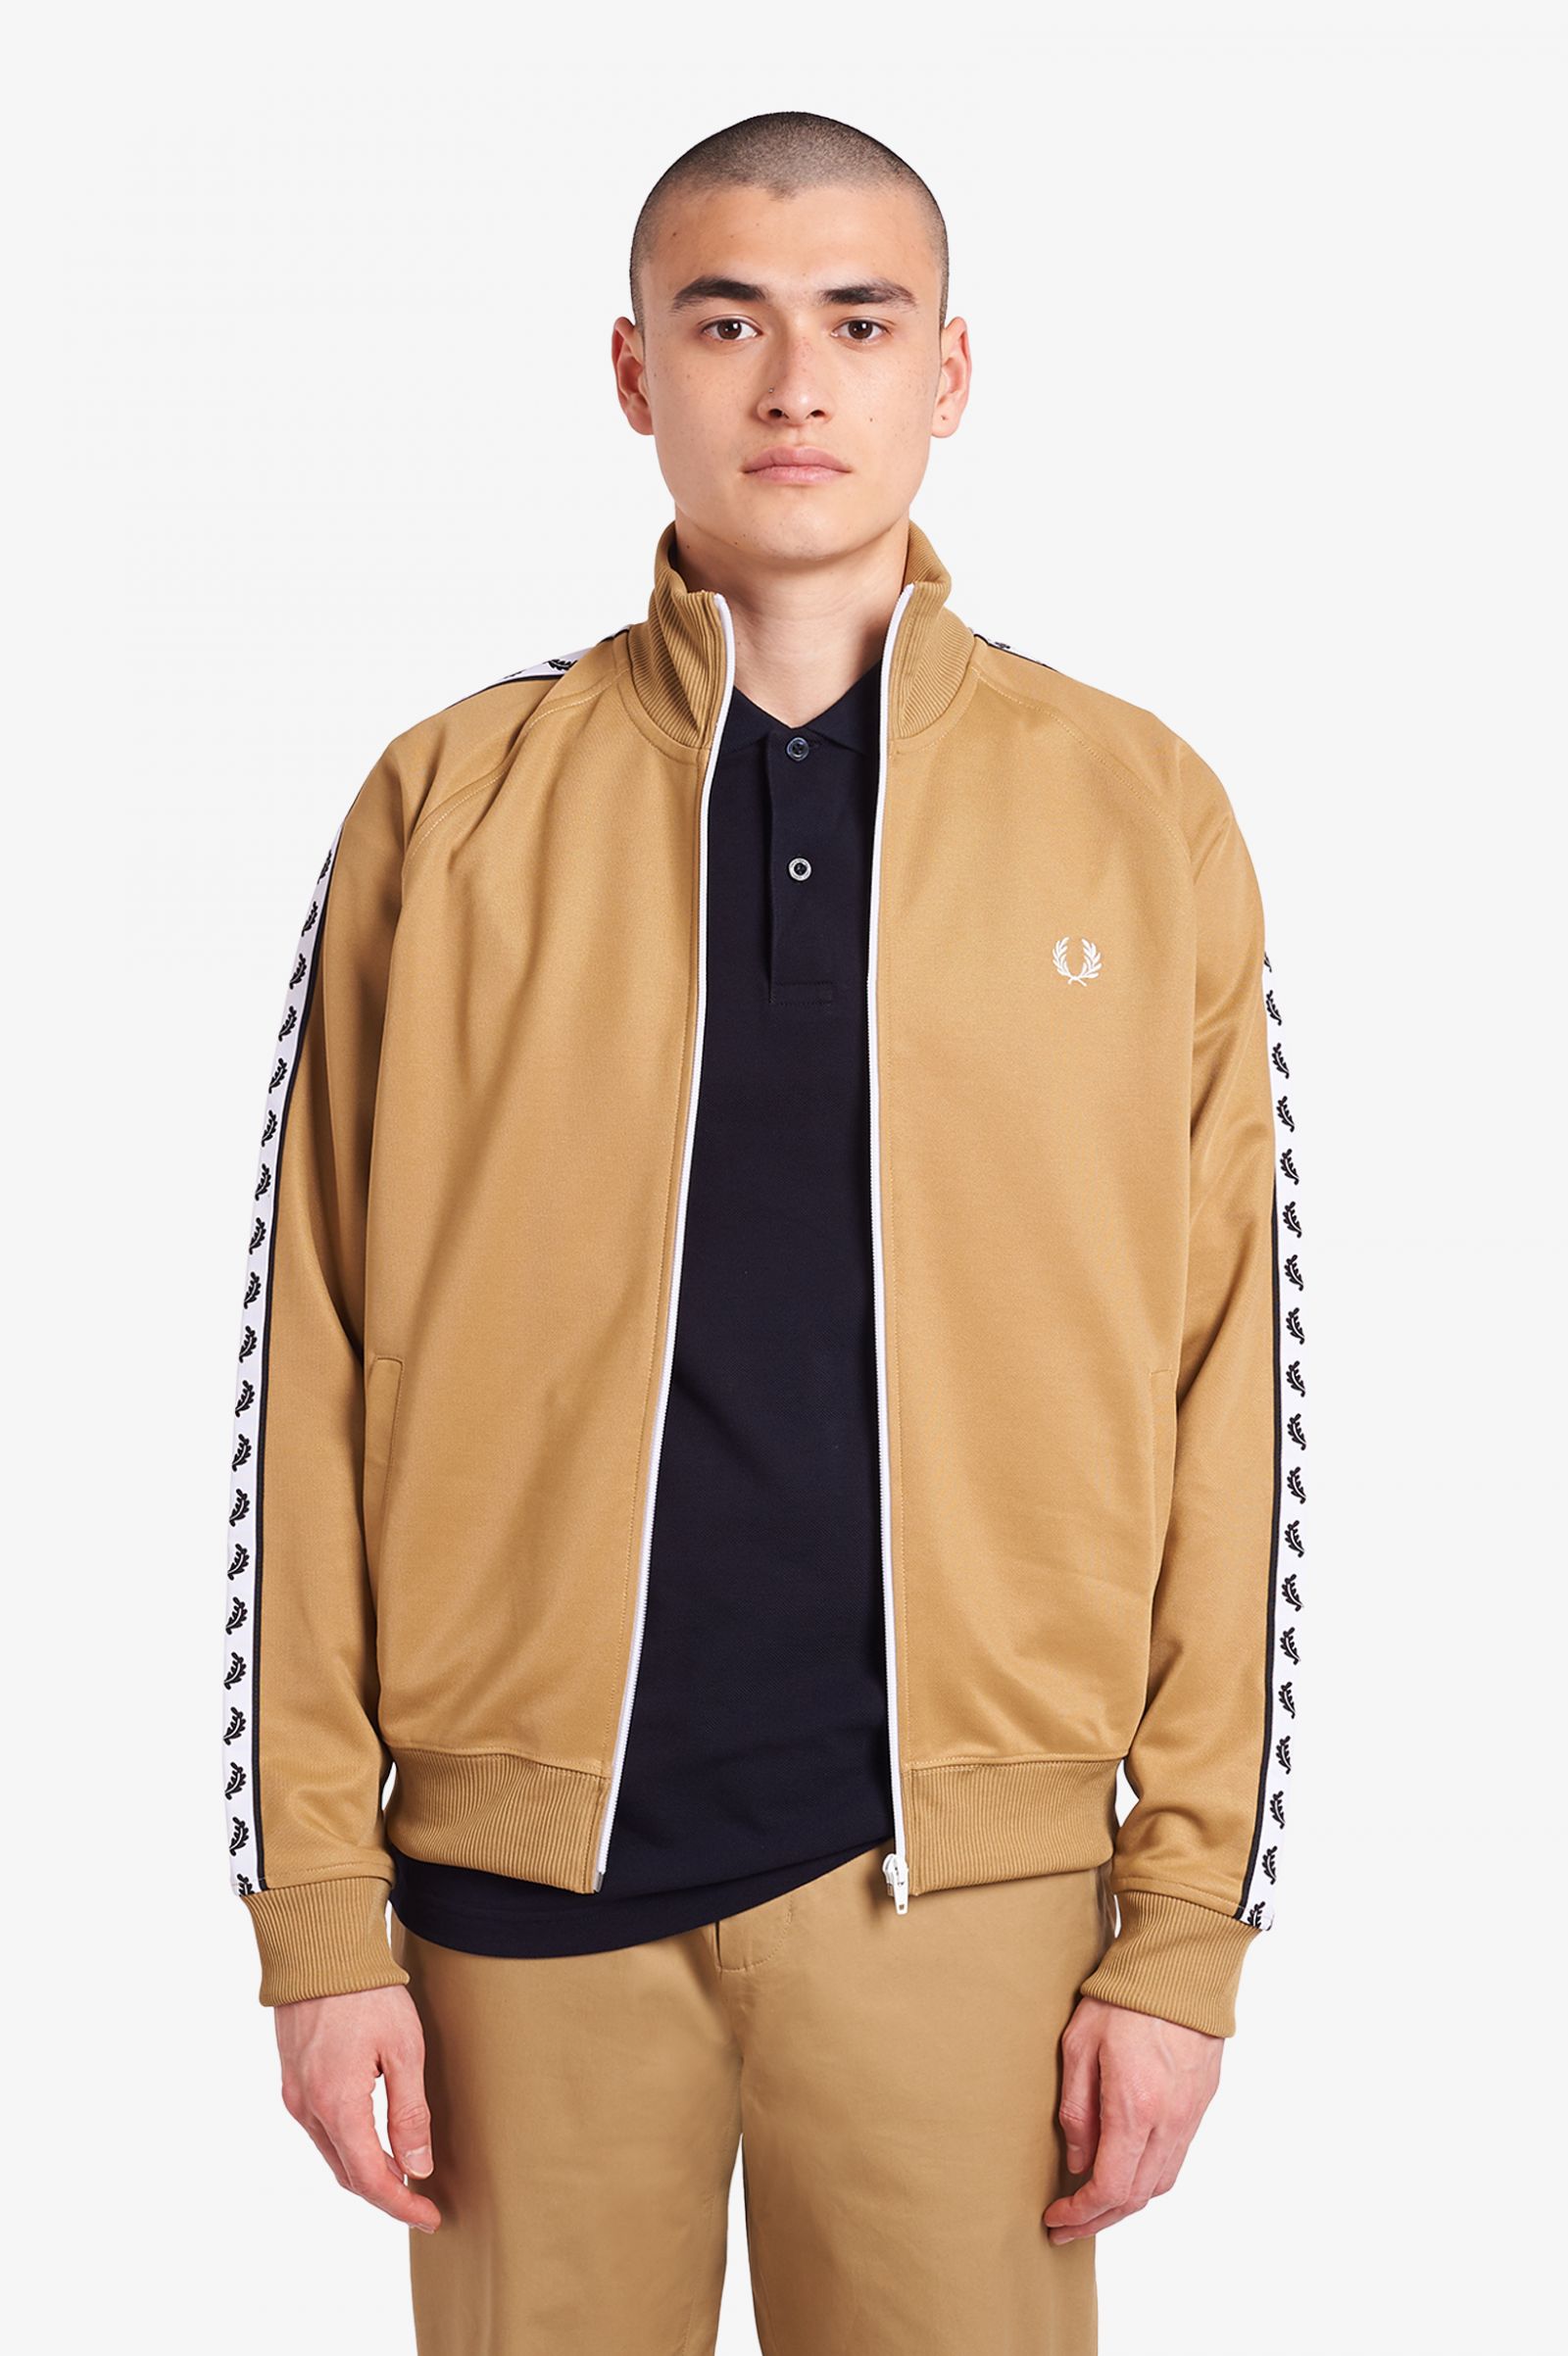 fred perry sports jacket